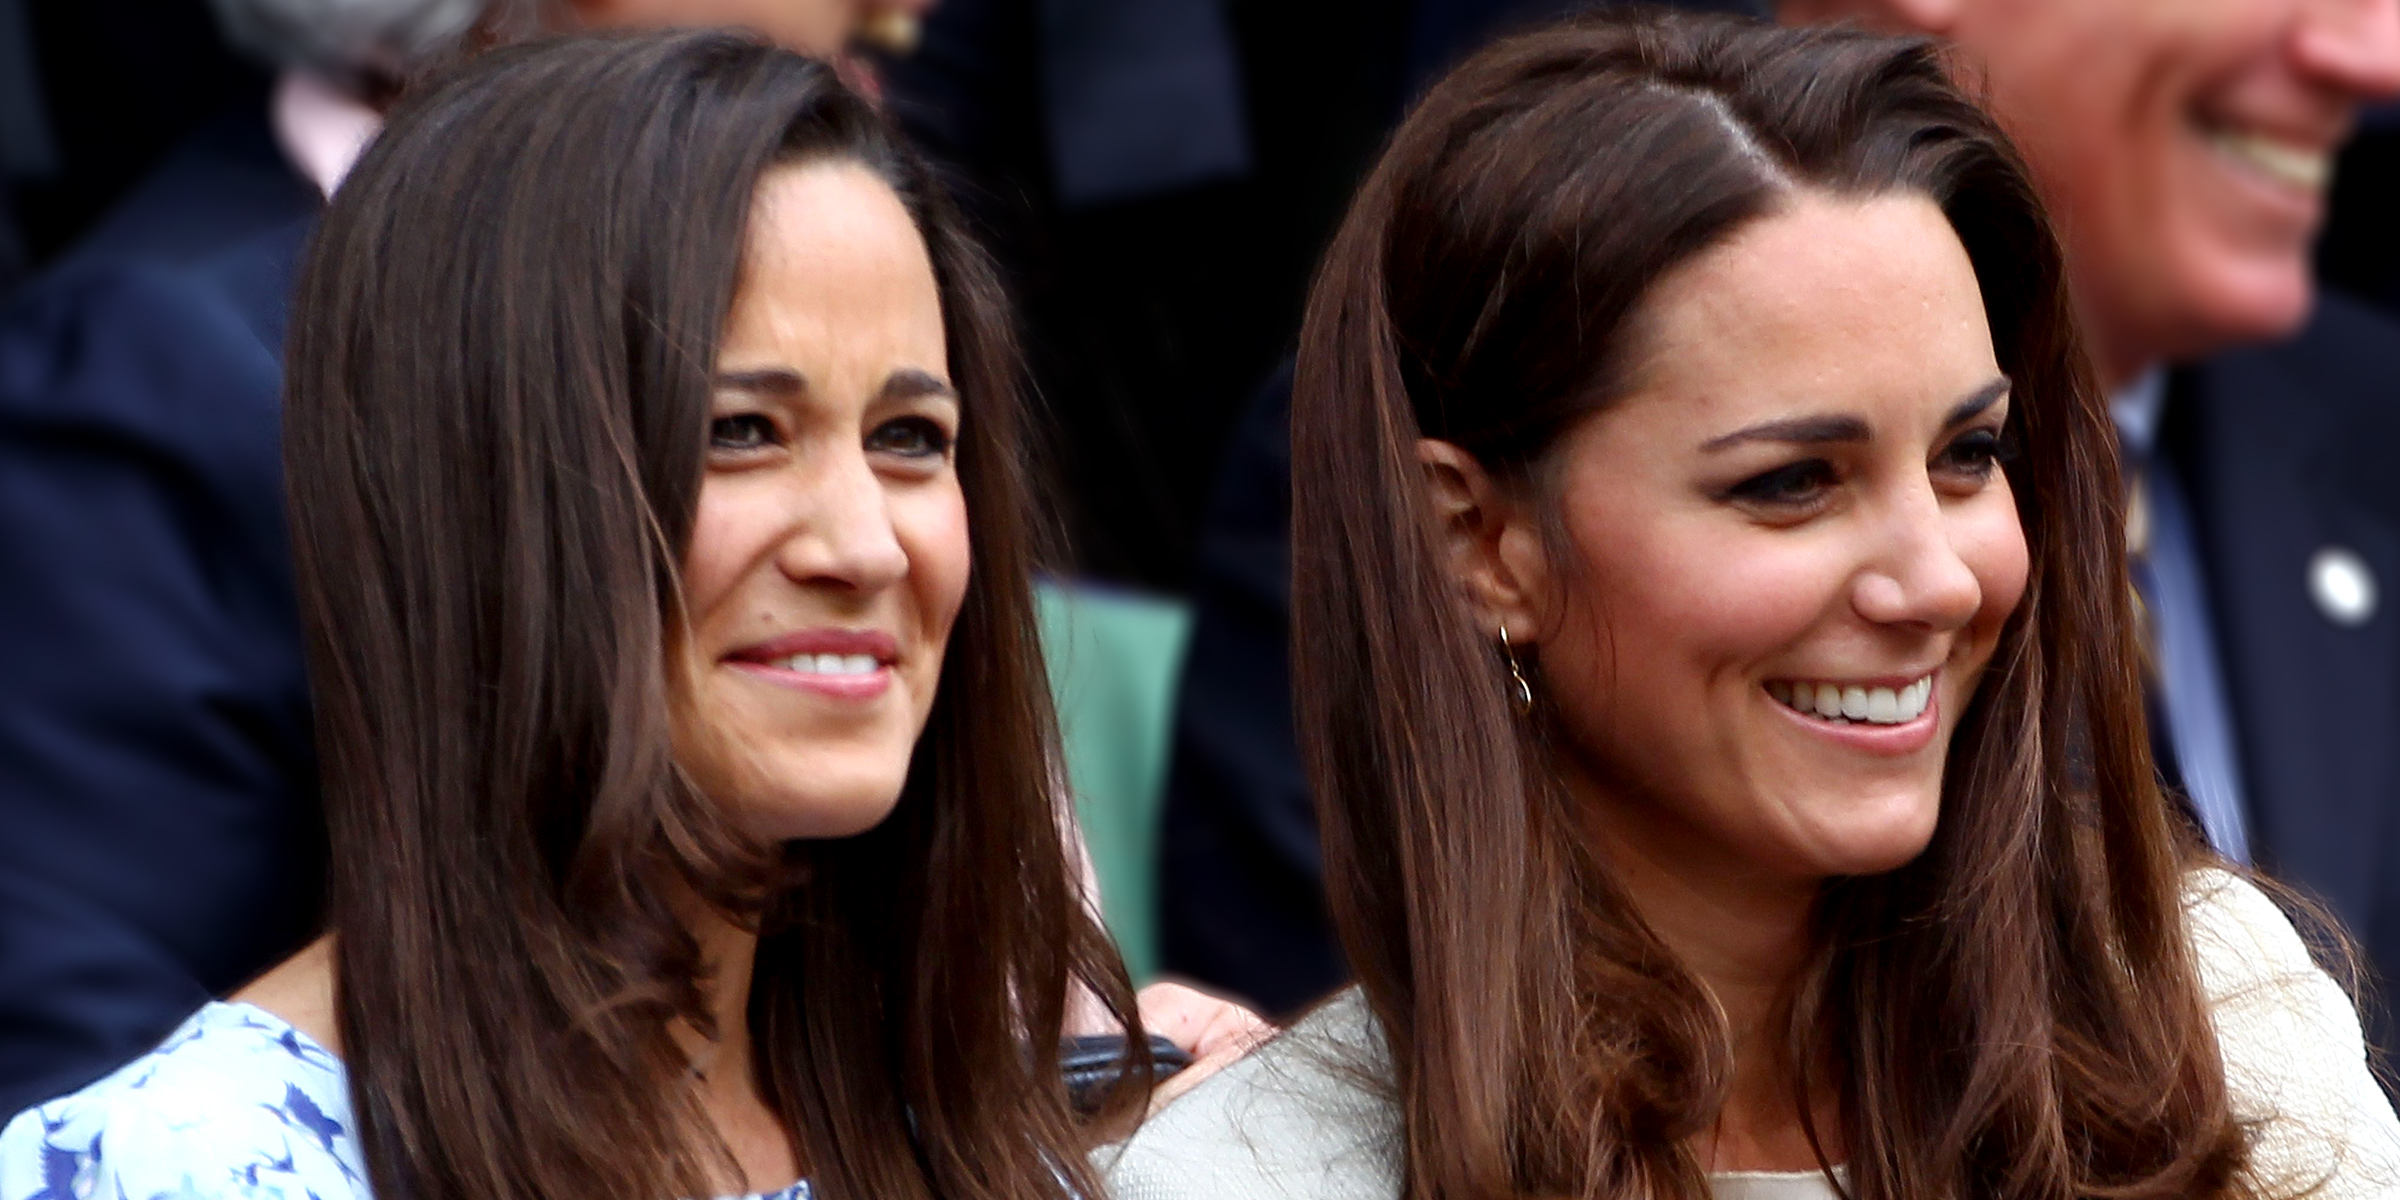 Princess Catherine and Pippa Middleton | Source: Getty Images